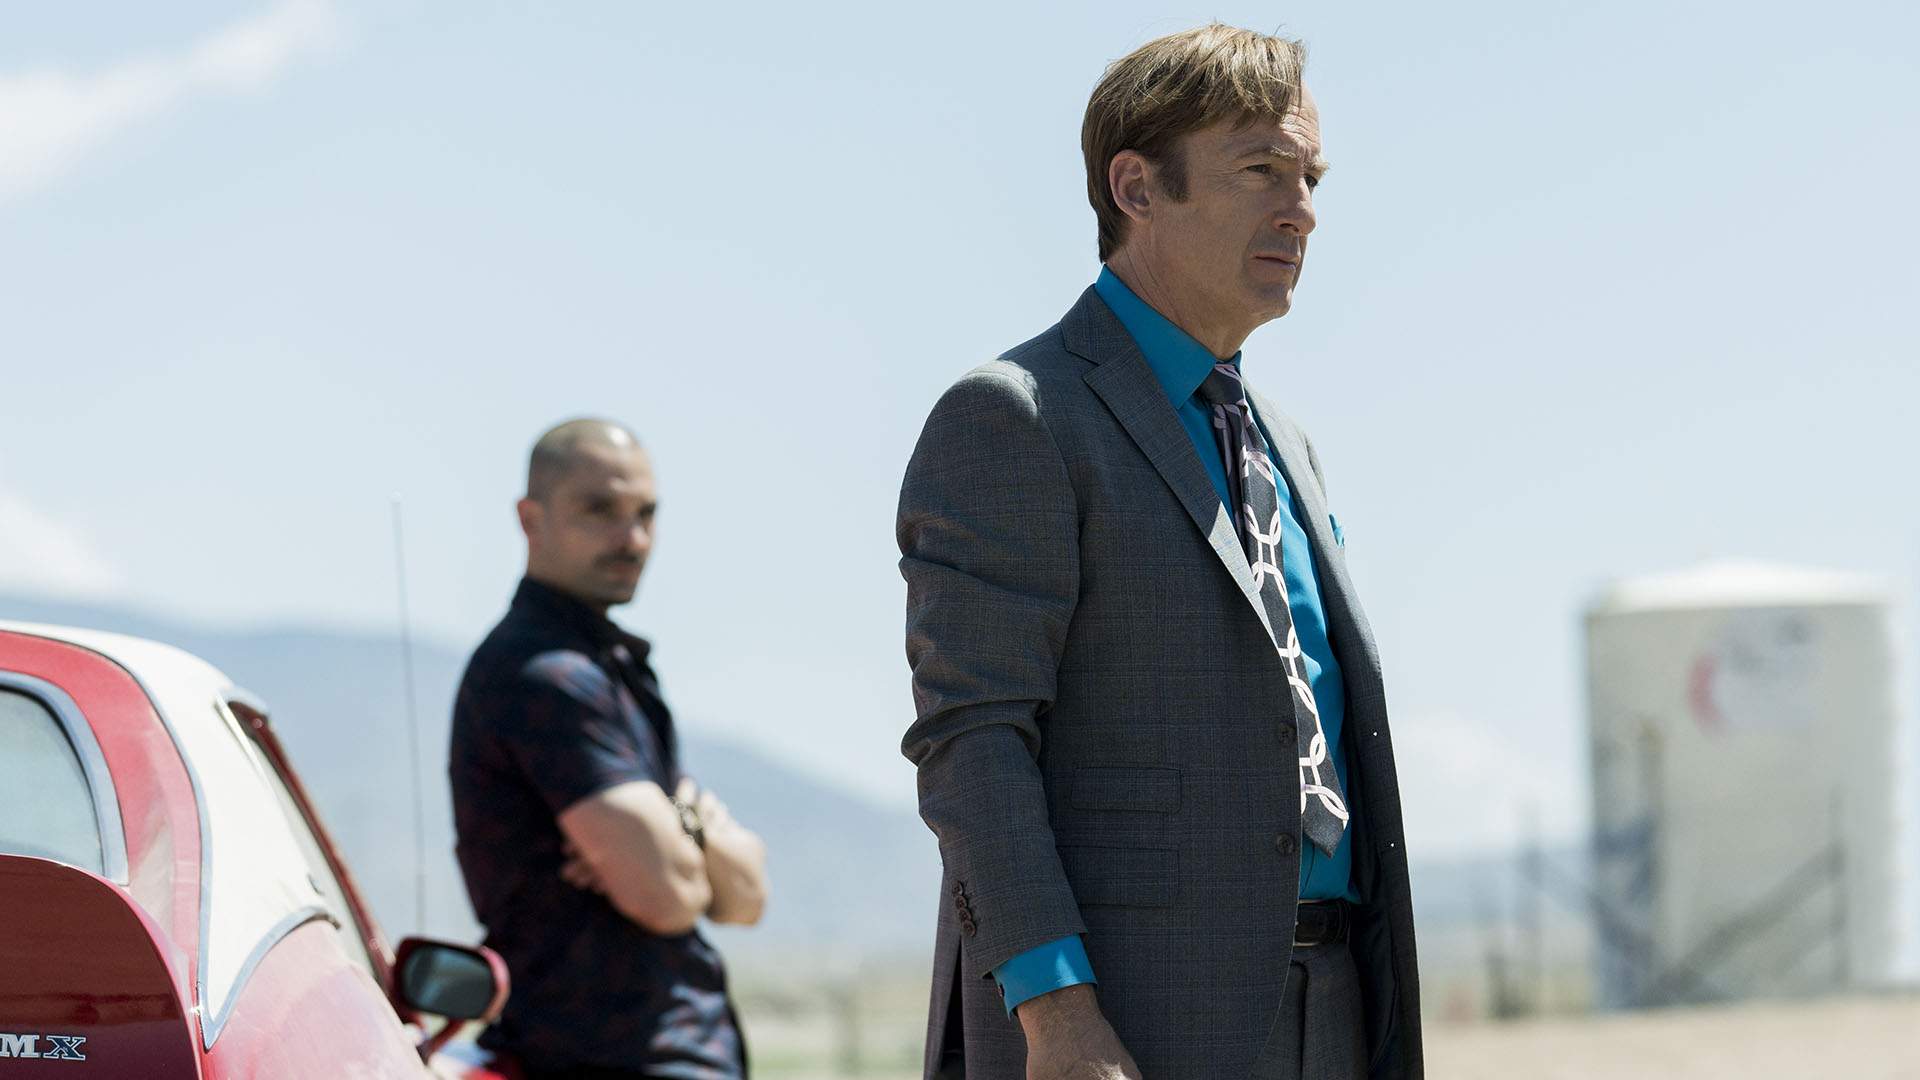 The Full Trailer For the Fifth Season of 'Better Call Saul' Is Here